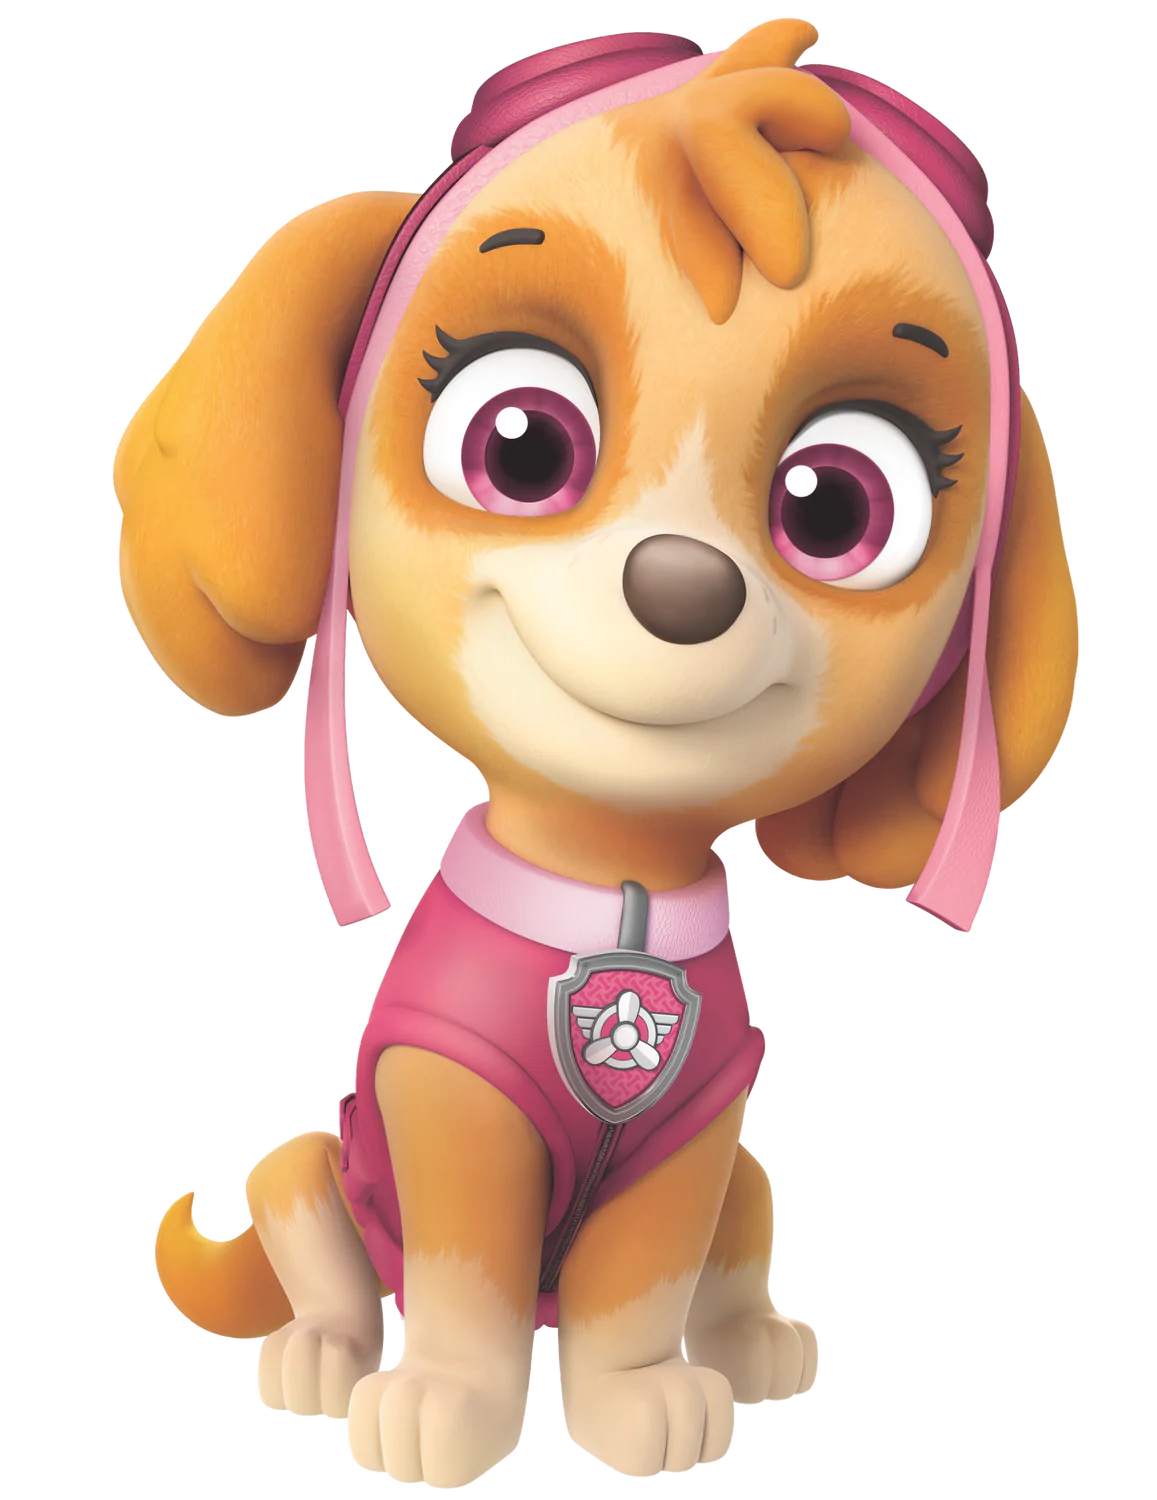 What Kind of Dog Is Skye from Paw Patrol? Cartoon Dogs Presented